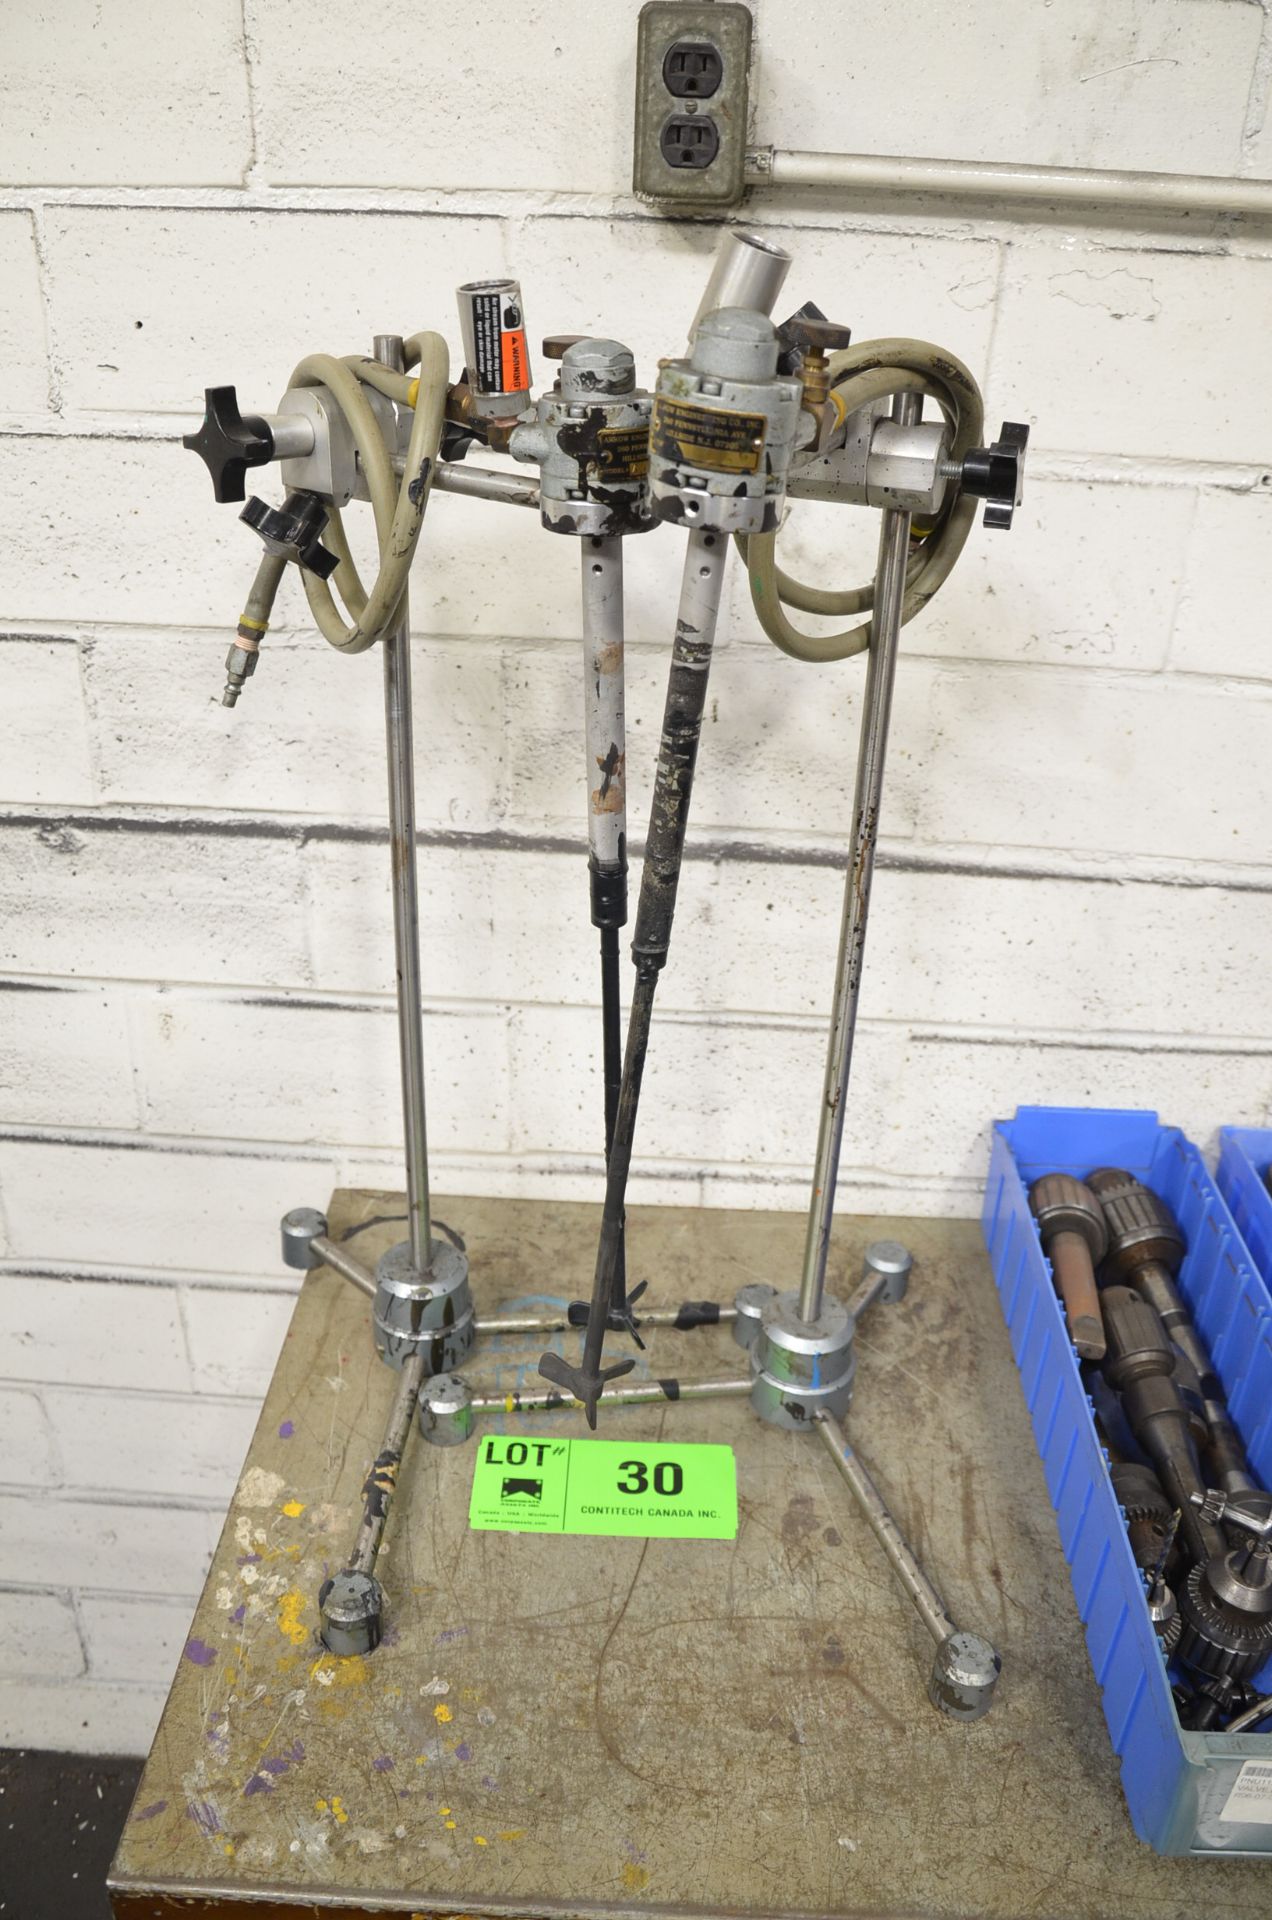 LOT/ (2) ARROW ENGINEERING PNEUMATIC PLUNGE MIXERS [RIGGING FEE FOR LOT #30 - $25 USD PLUS